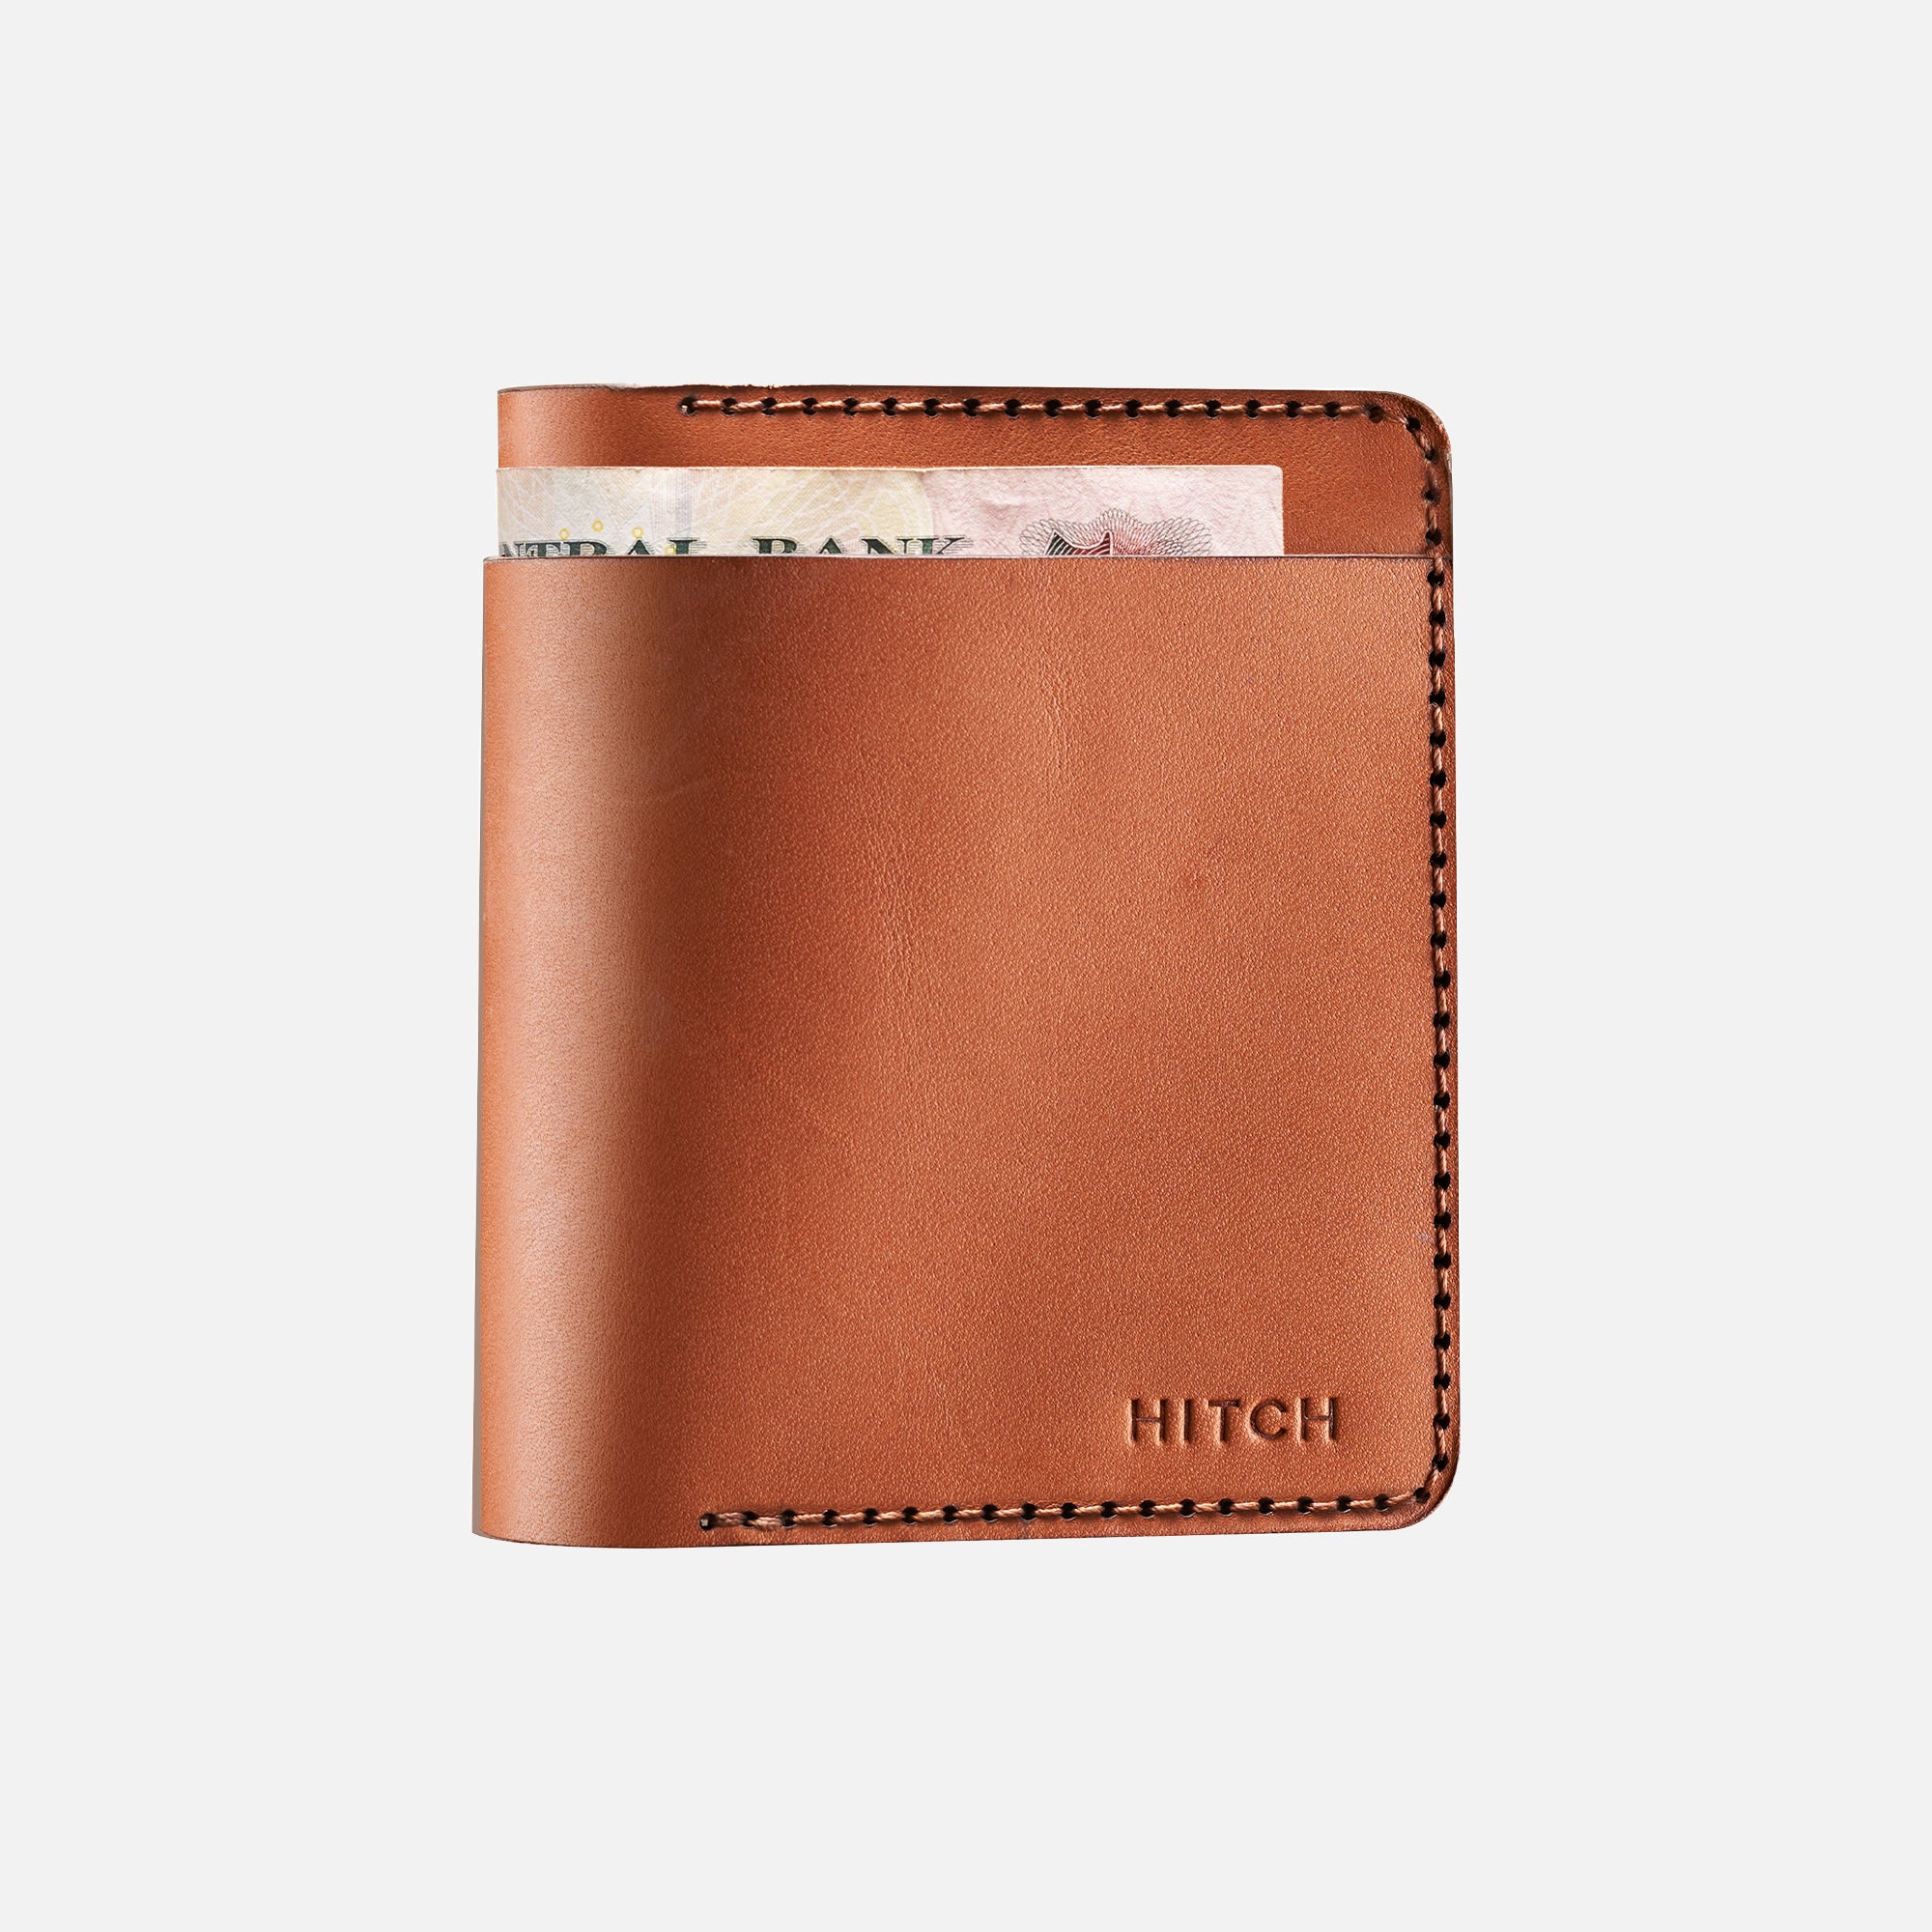 Brown leather bifold wallet with stitched detailing and currency note peeking out, isolated on white background.